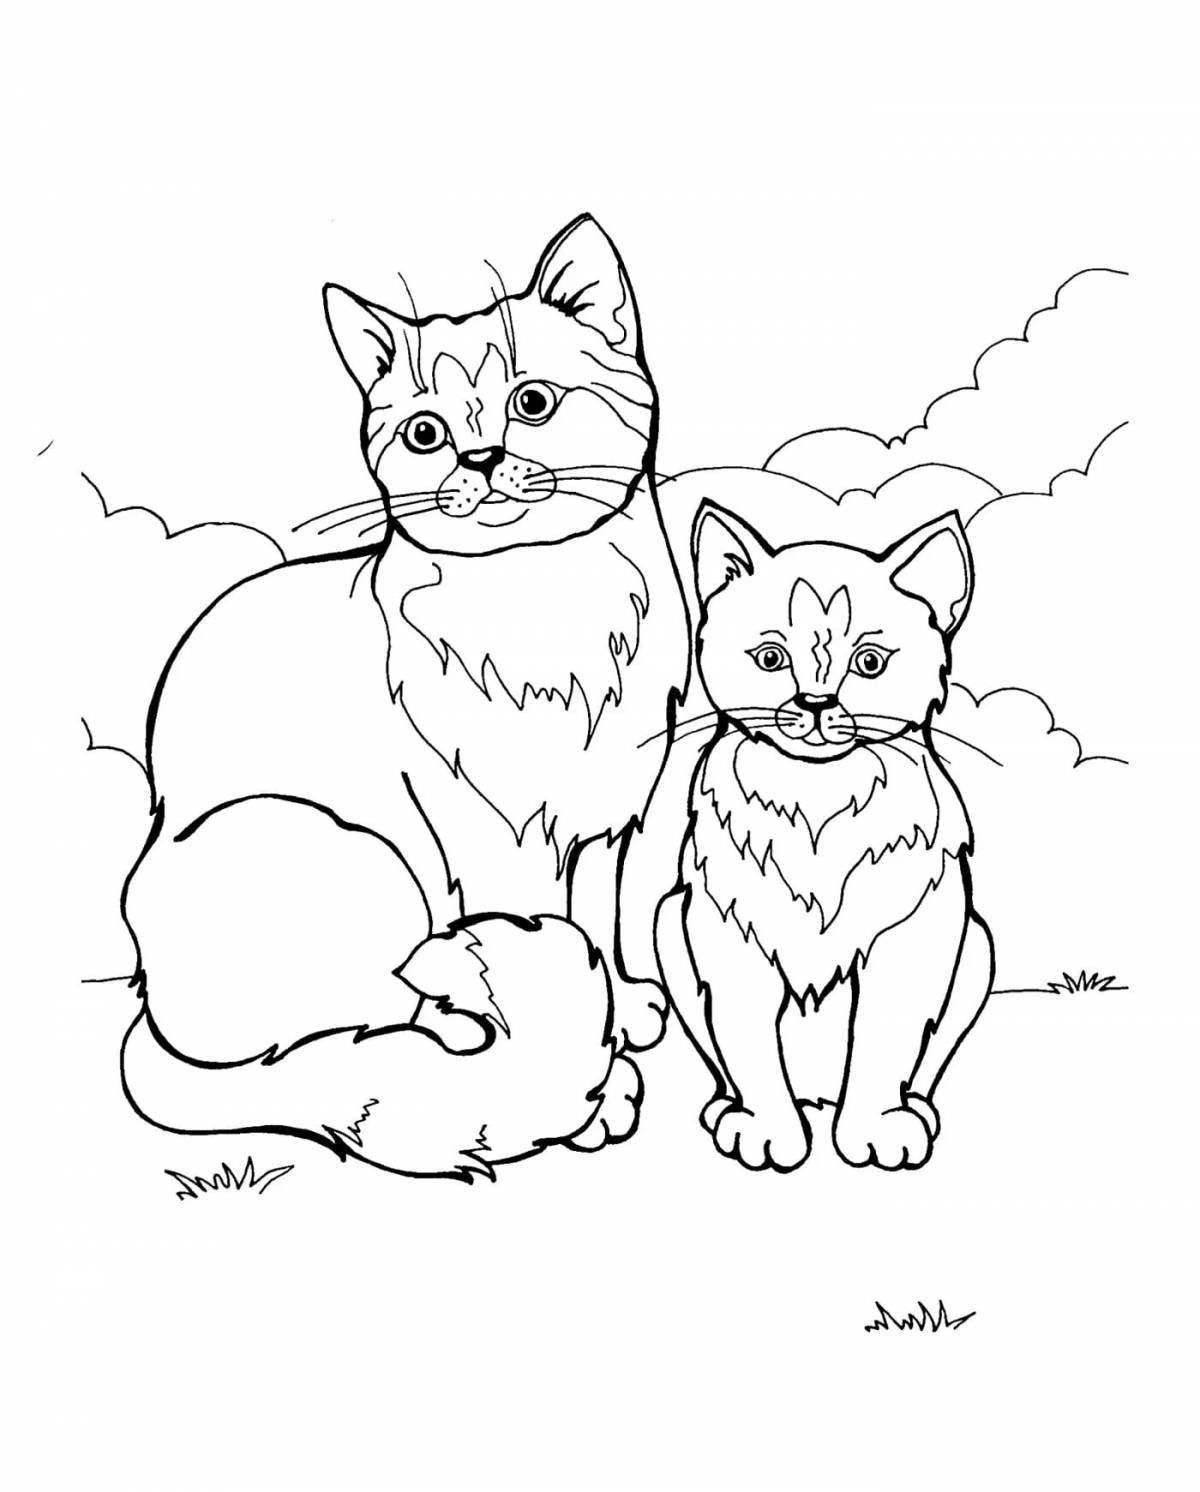 Cute pets coloring book for kids 5-6 years old